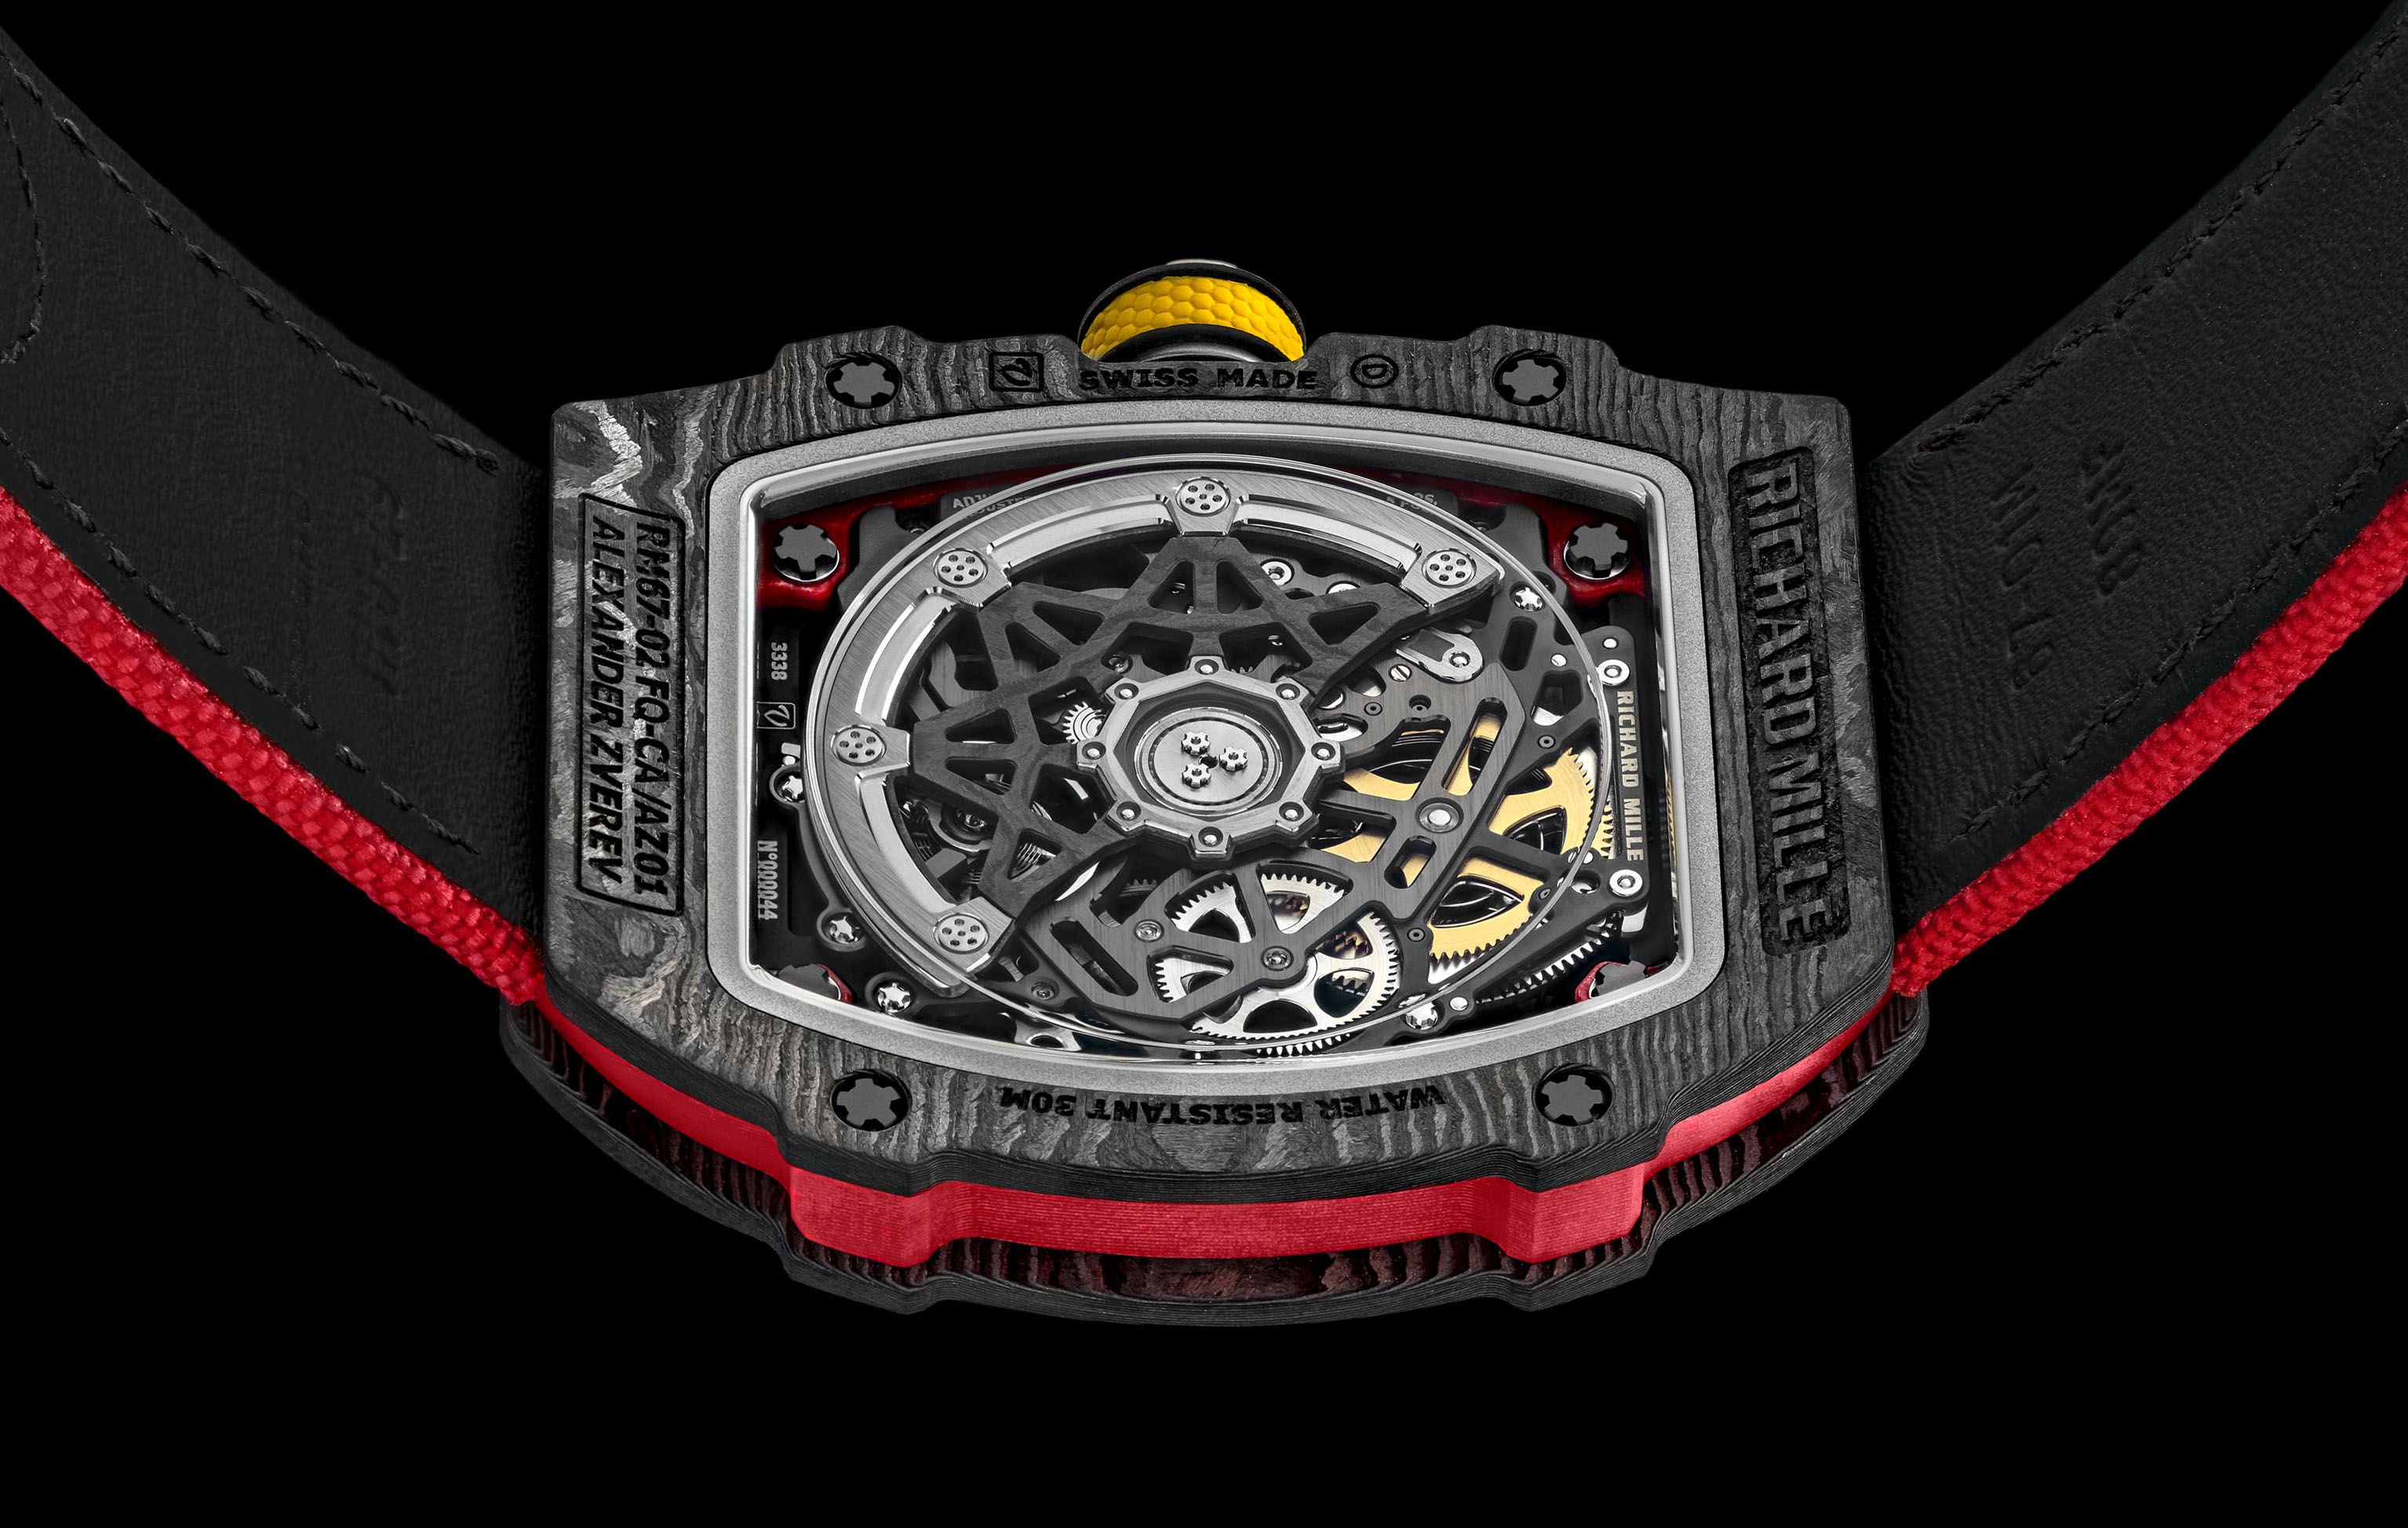 Richard Mille RM010 WG LEMANS CLASSIC LIMITED EDITION 30 Pieces